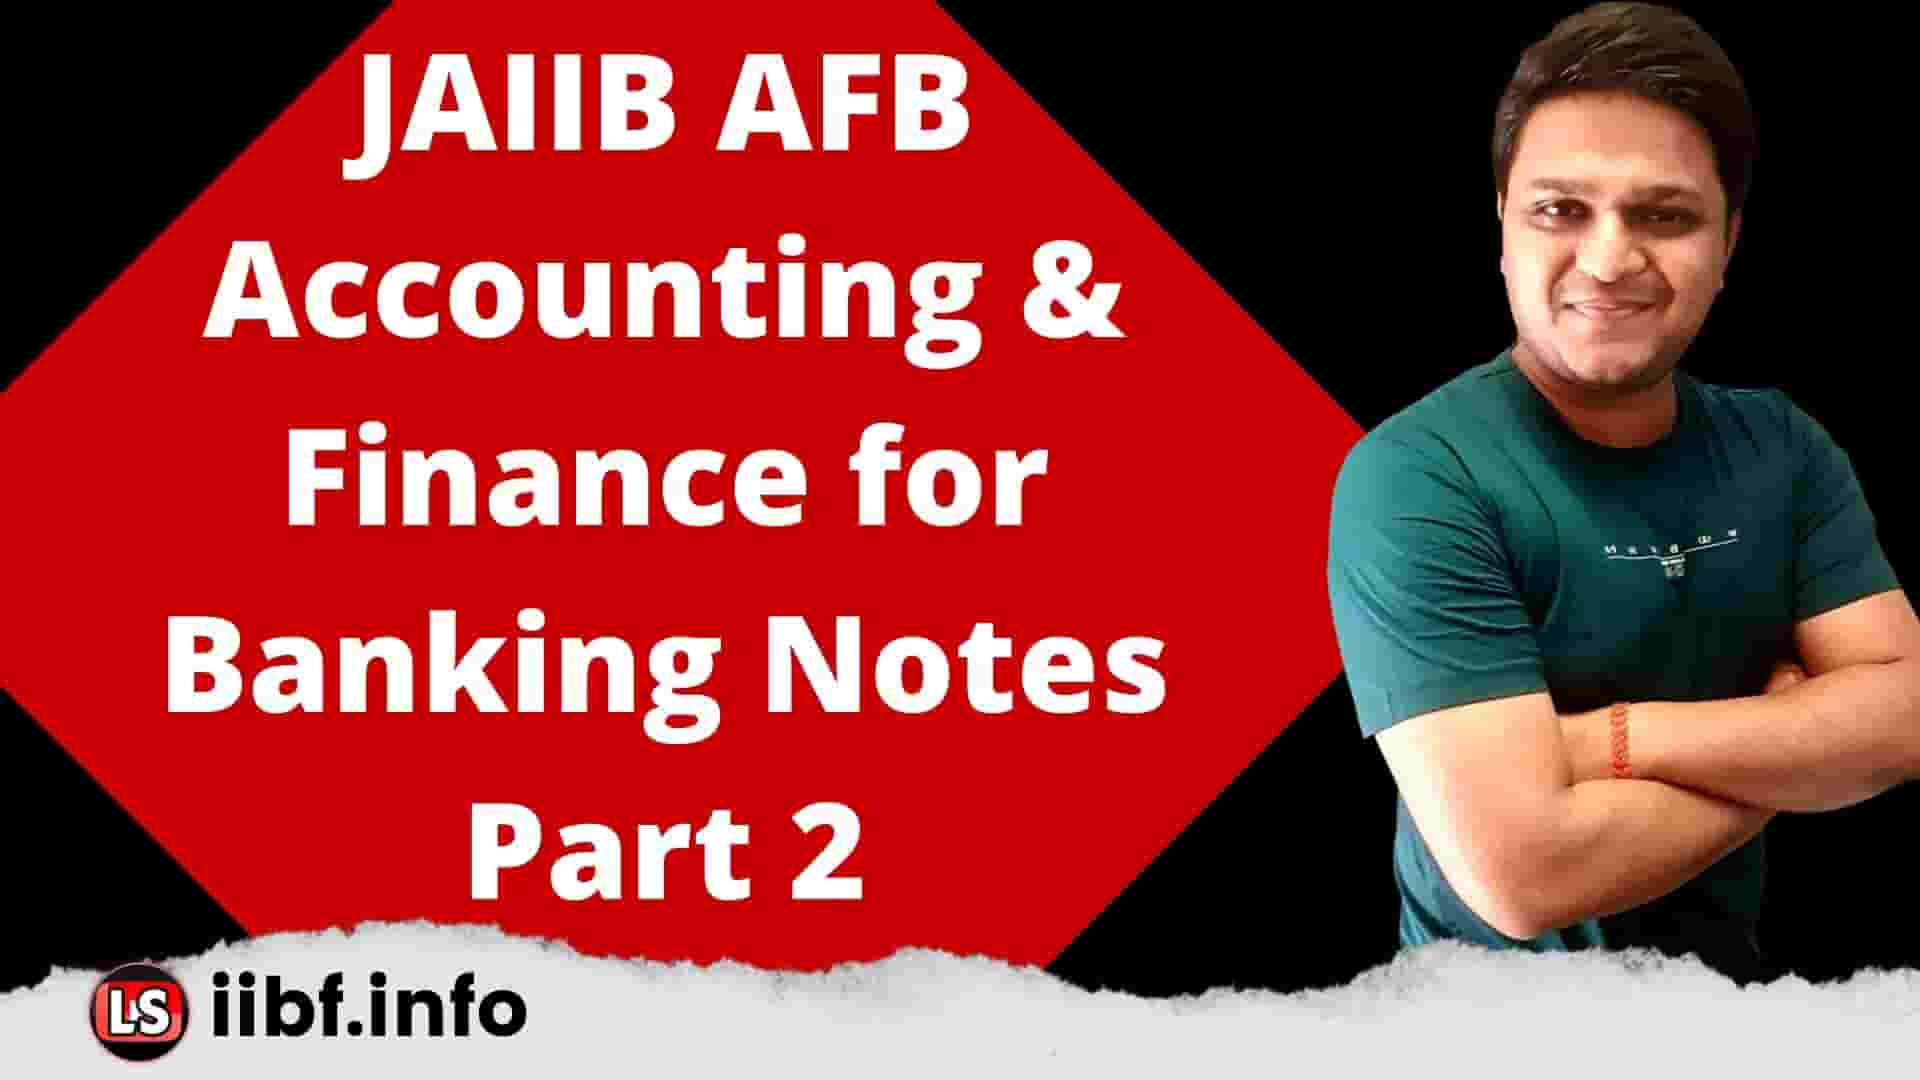 JAIIB AFB Accounting & Finance for Banking Short Notes Part 2